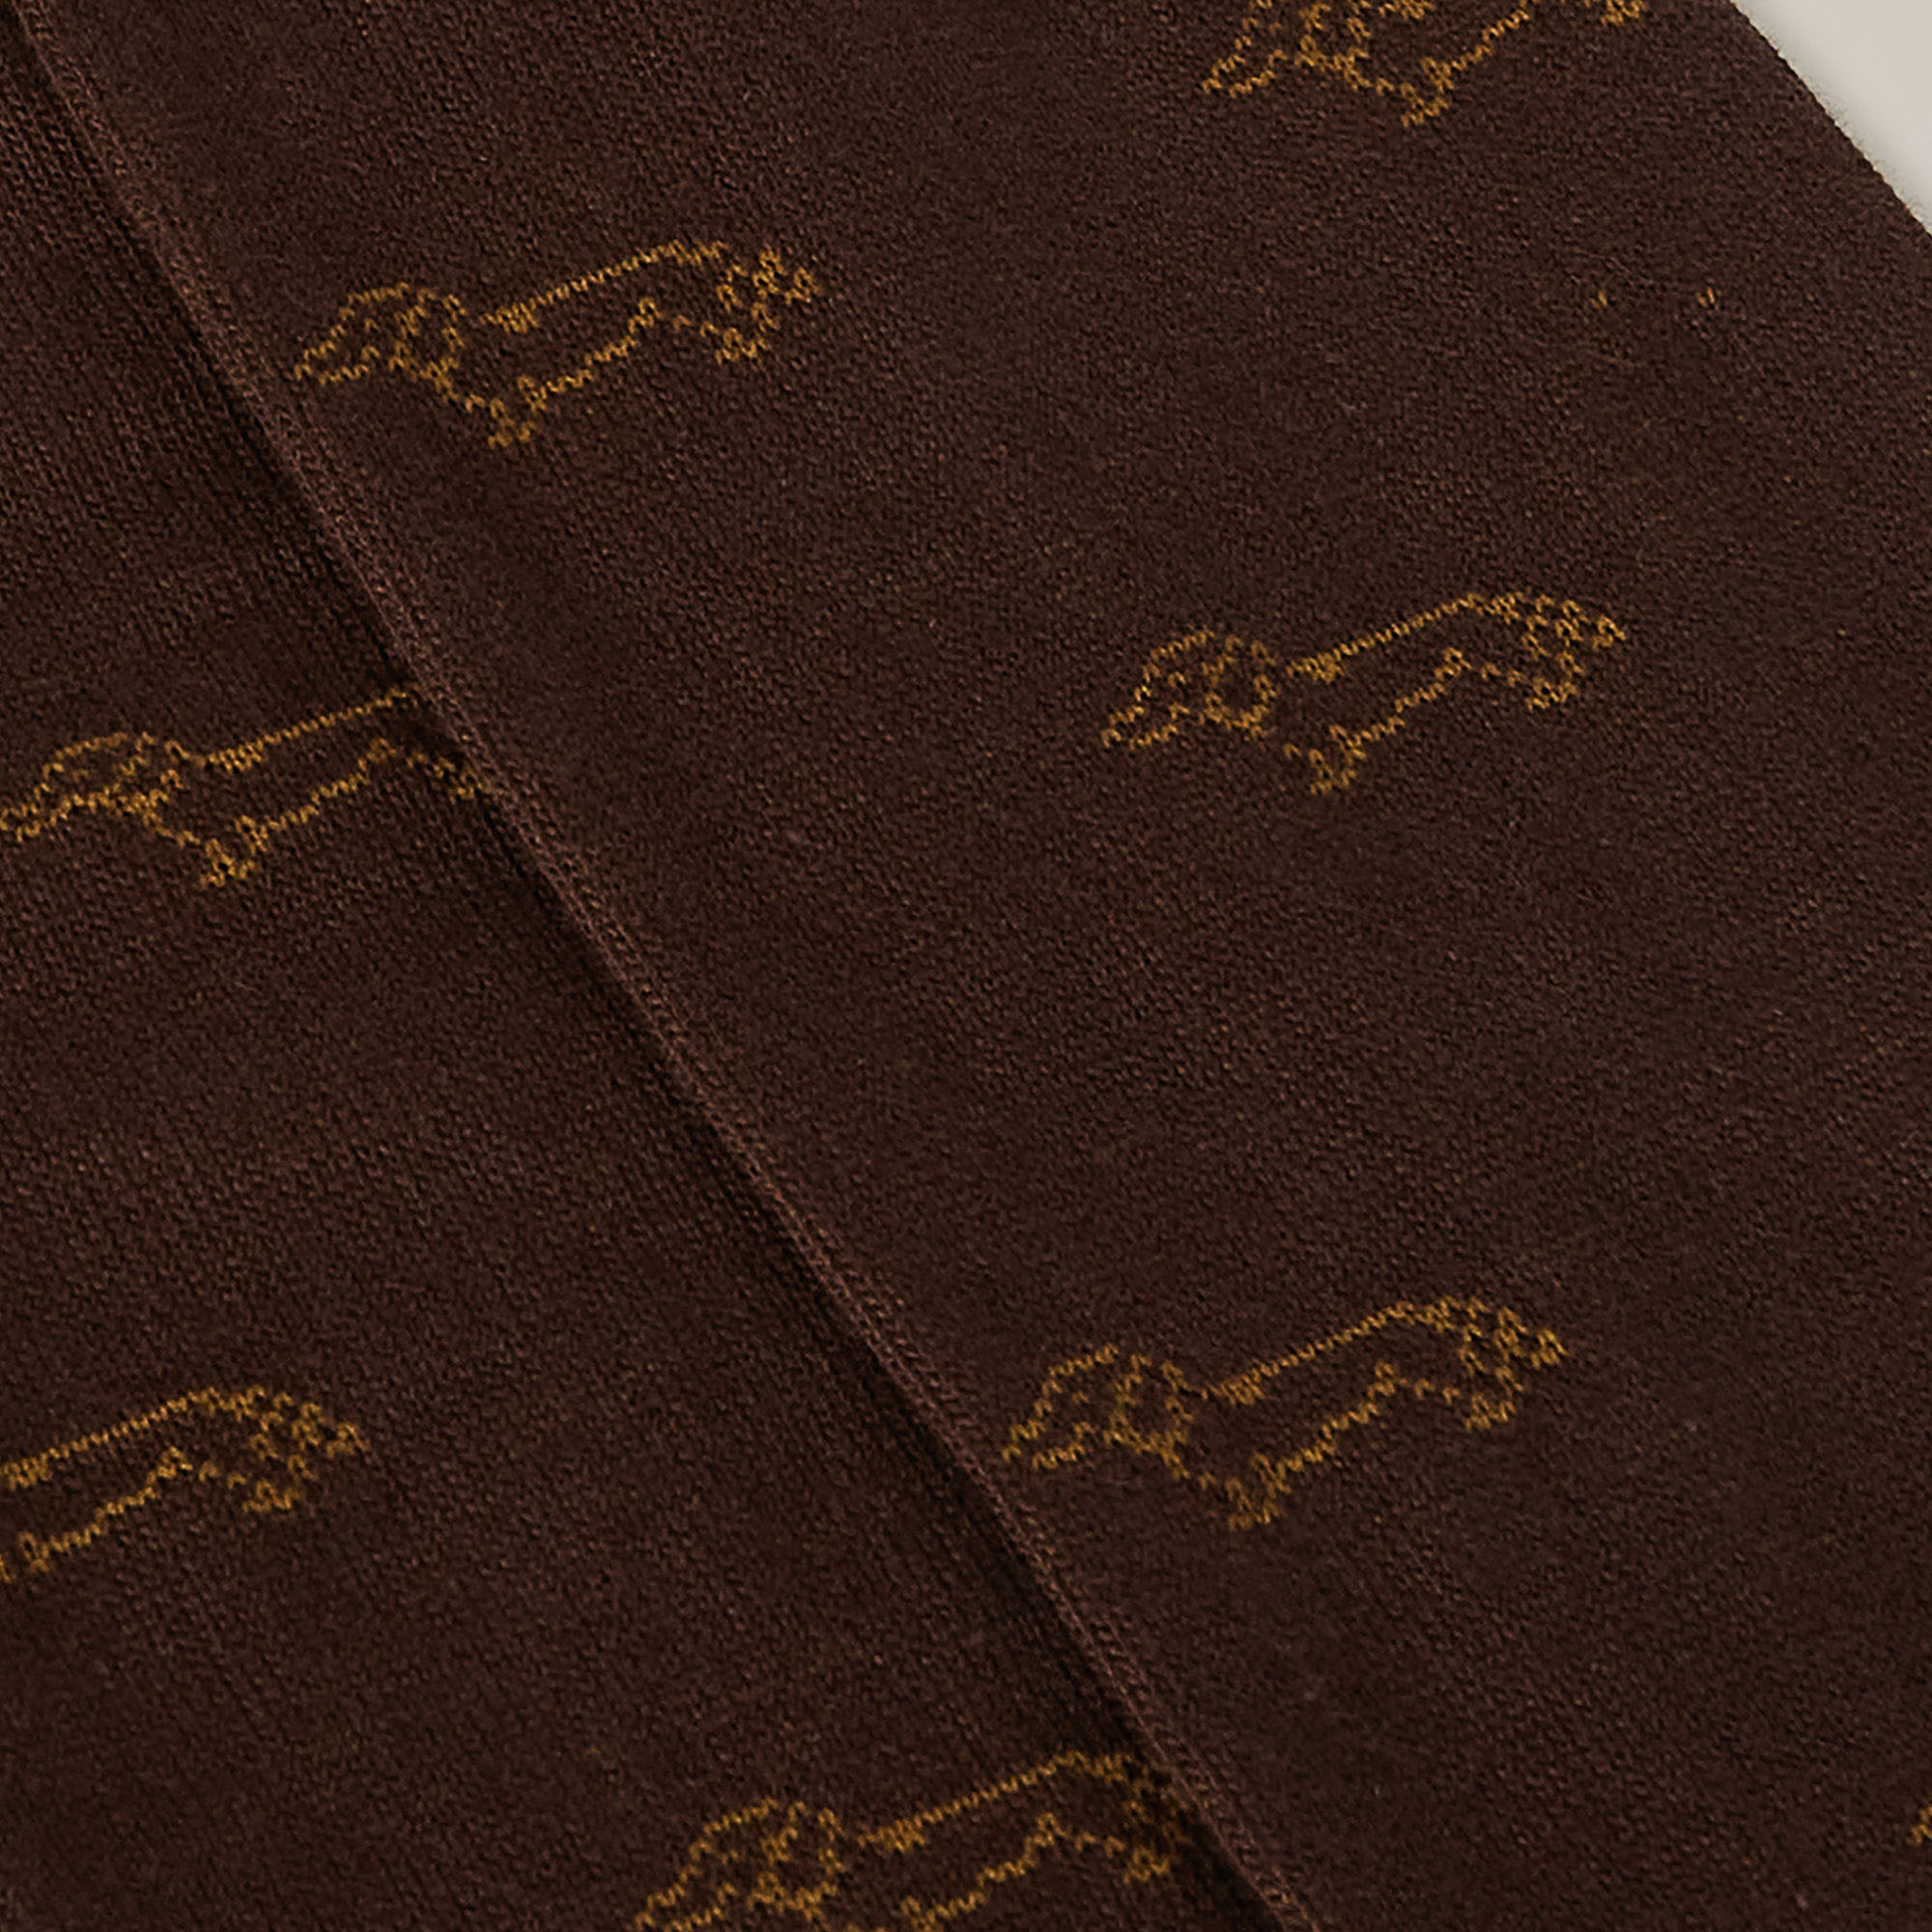 Long Socks With Dachshund Motif All Over, Brown, large